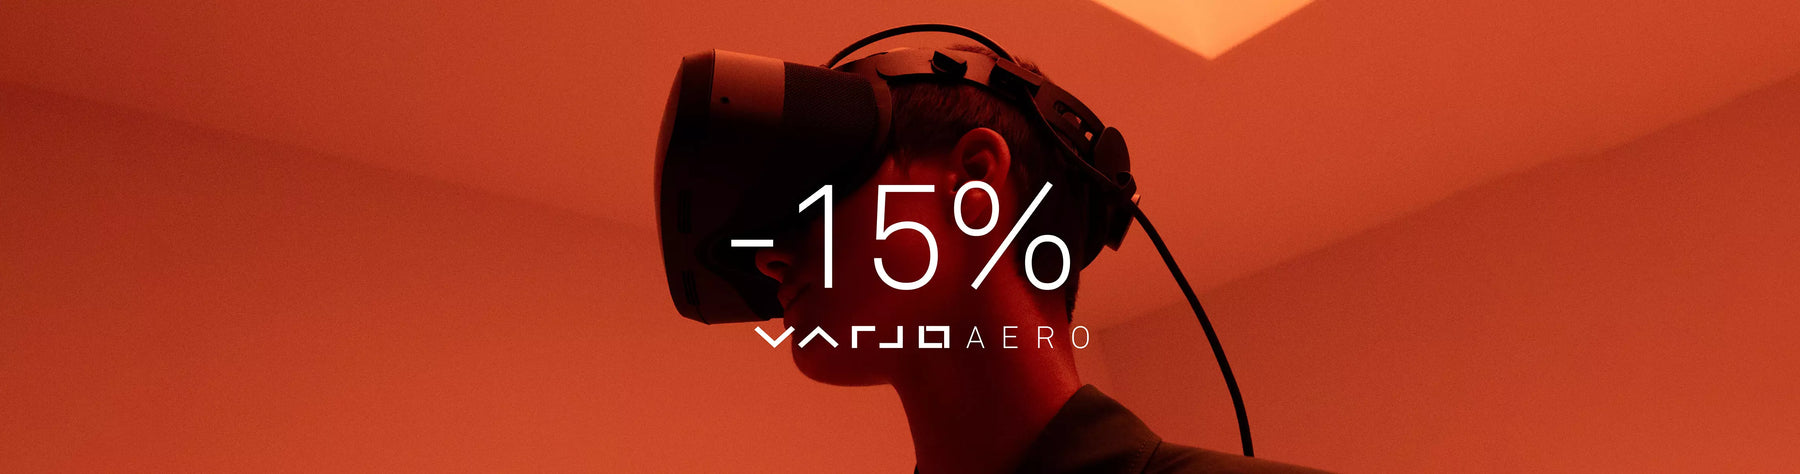 Spring into the Varjo Aero: Enjoy 15% off the Ultimate VR Headset